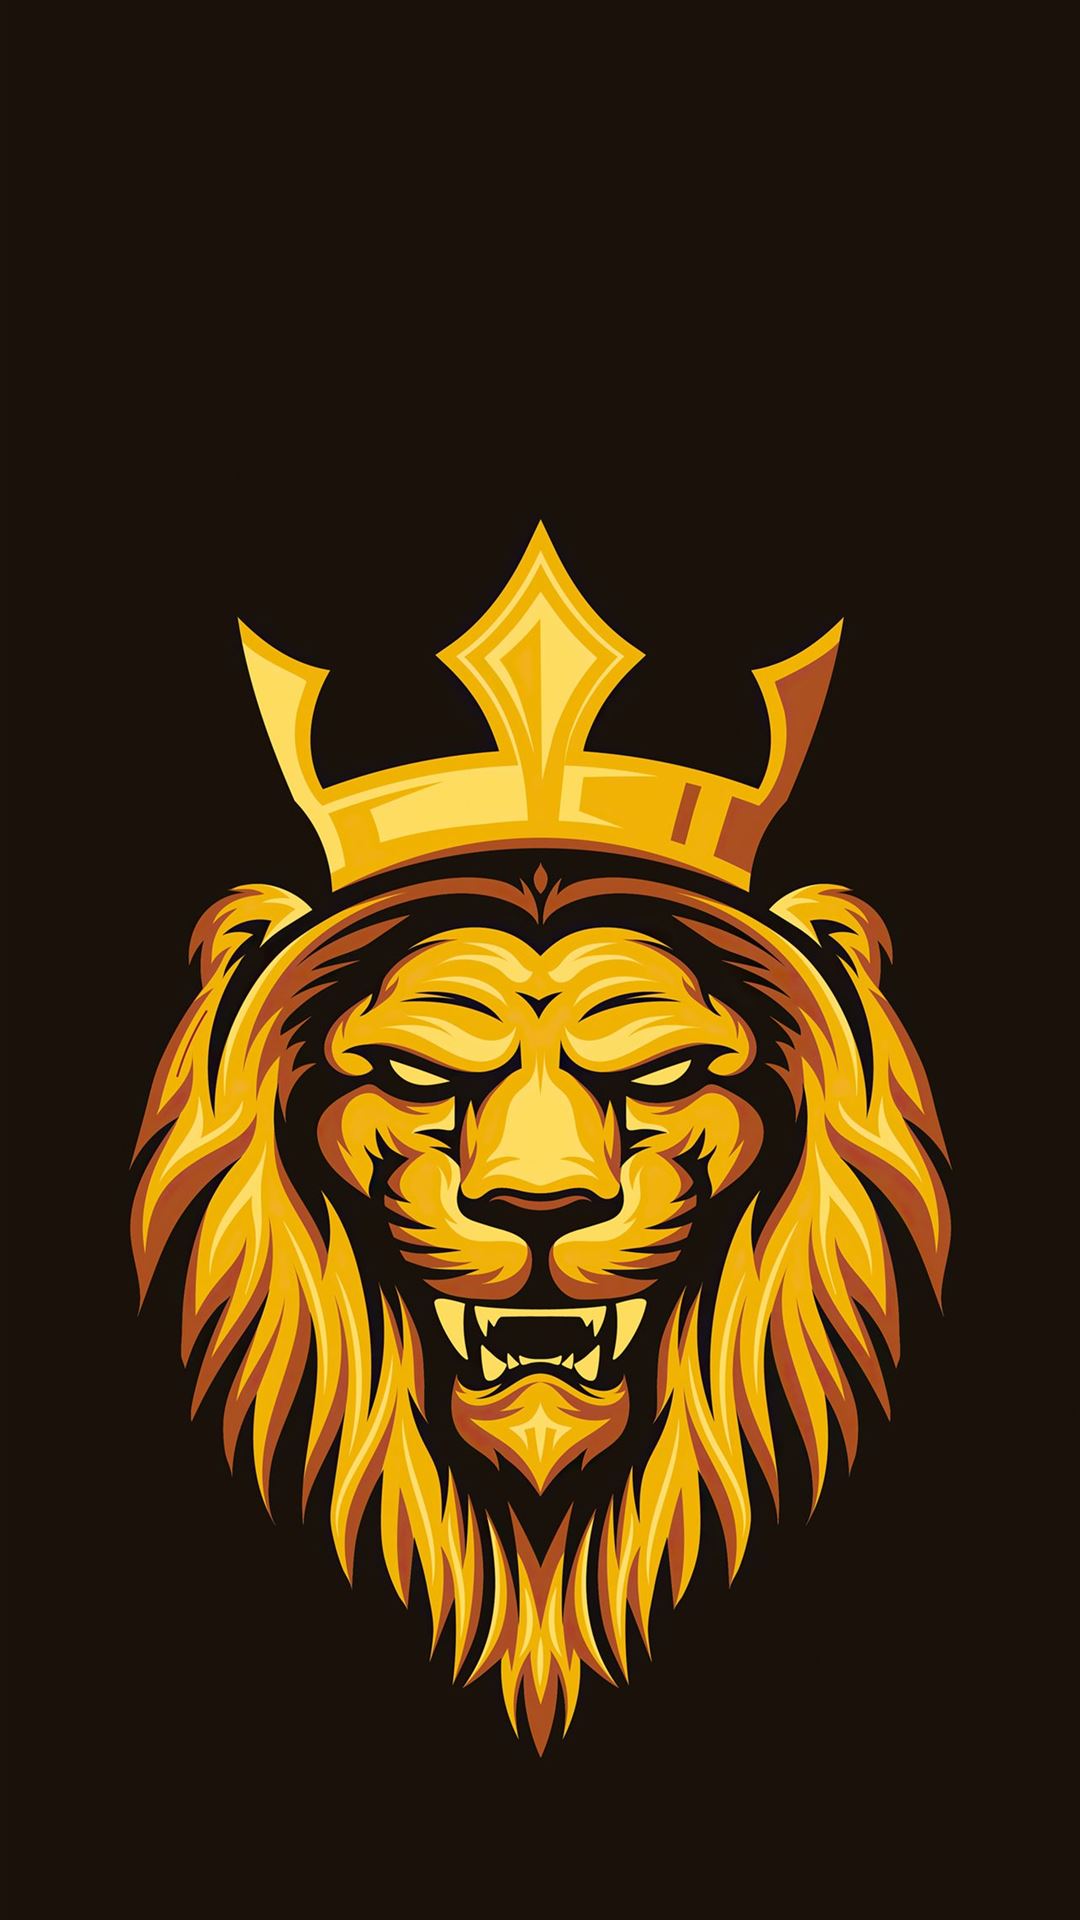 Lion King Minimal 4k Samsung Galaxy Note 9 8 S9 S8 Iphone Wallpapers Free Download